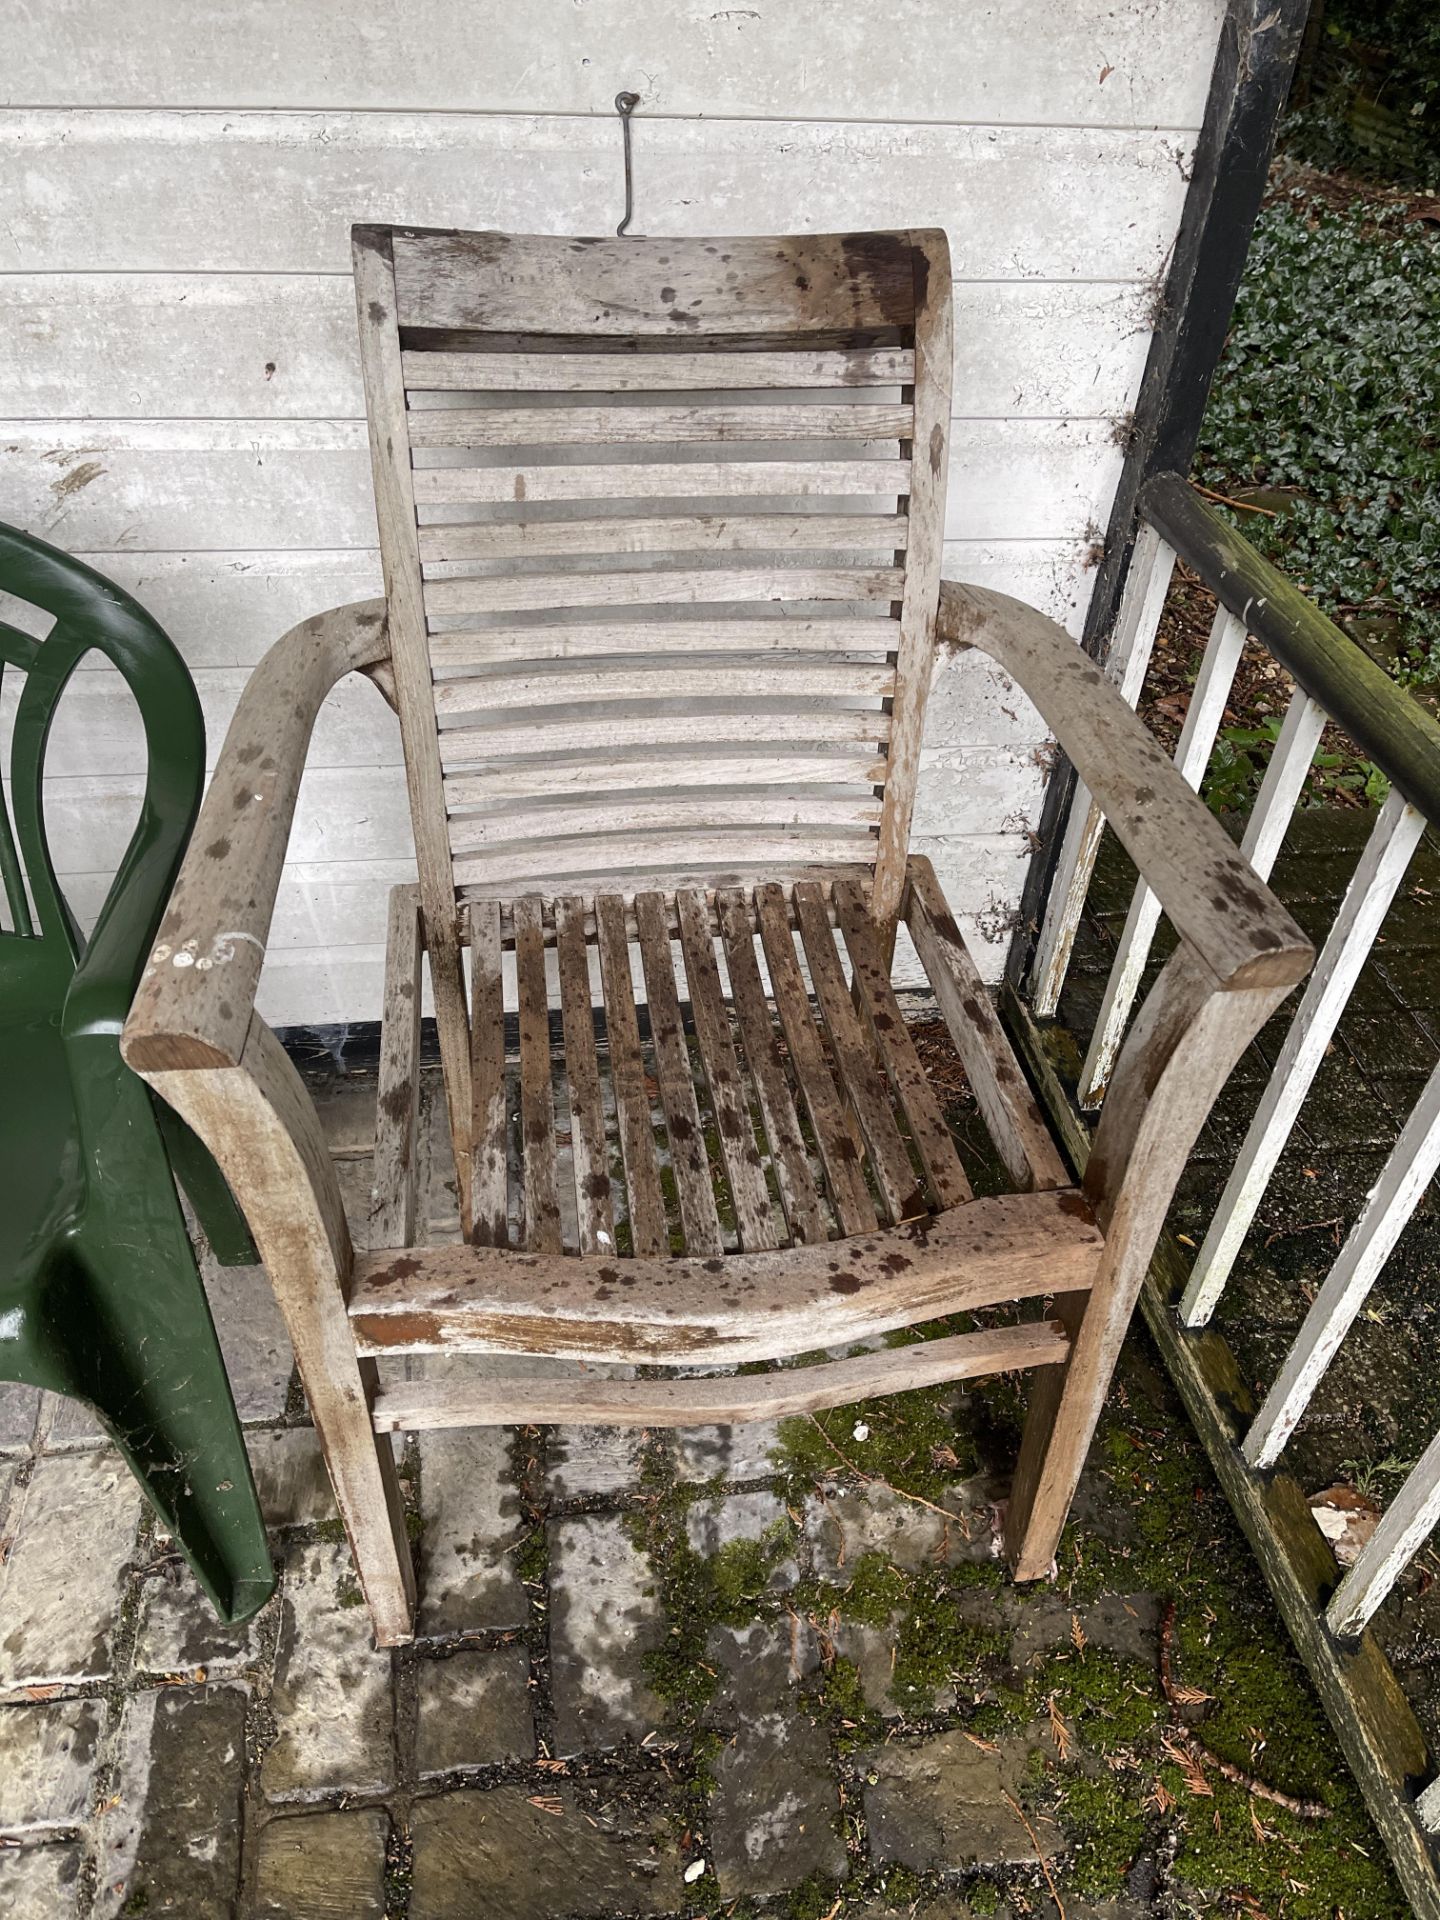 2 OUTDOOR CHAIRS - Image 2 of 2